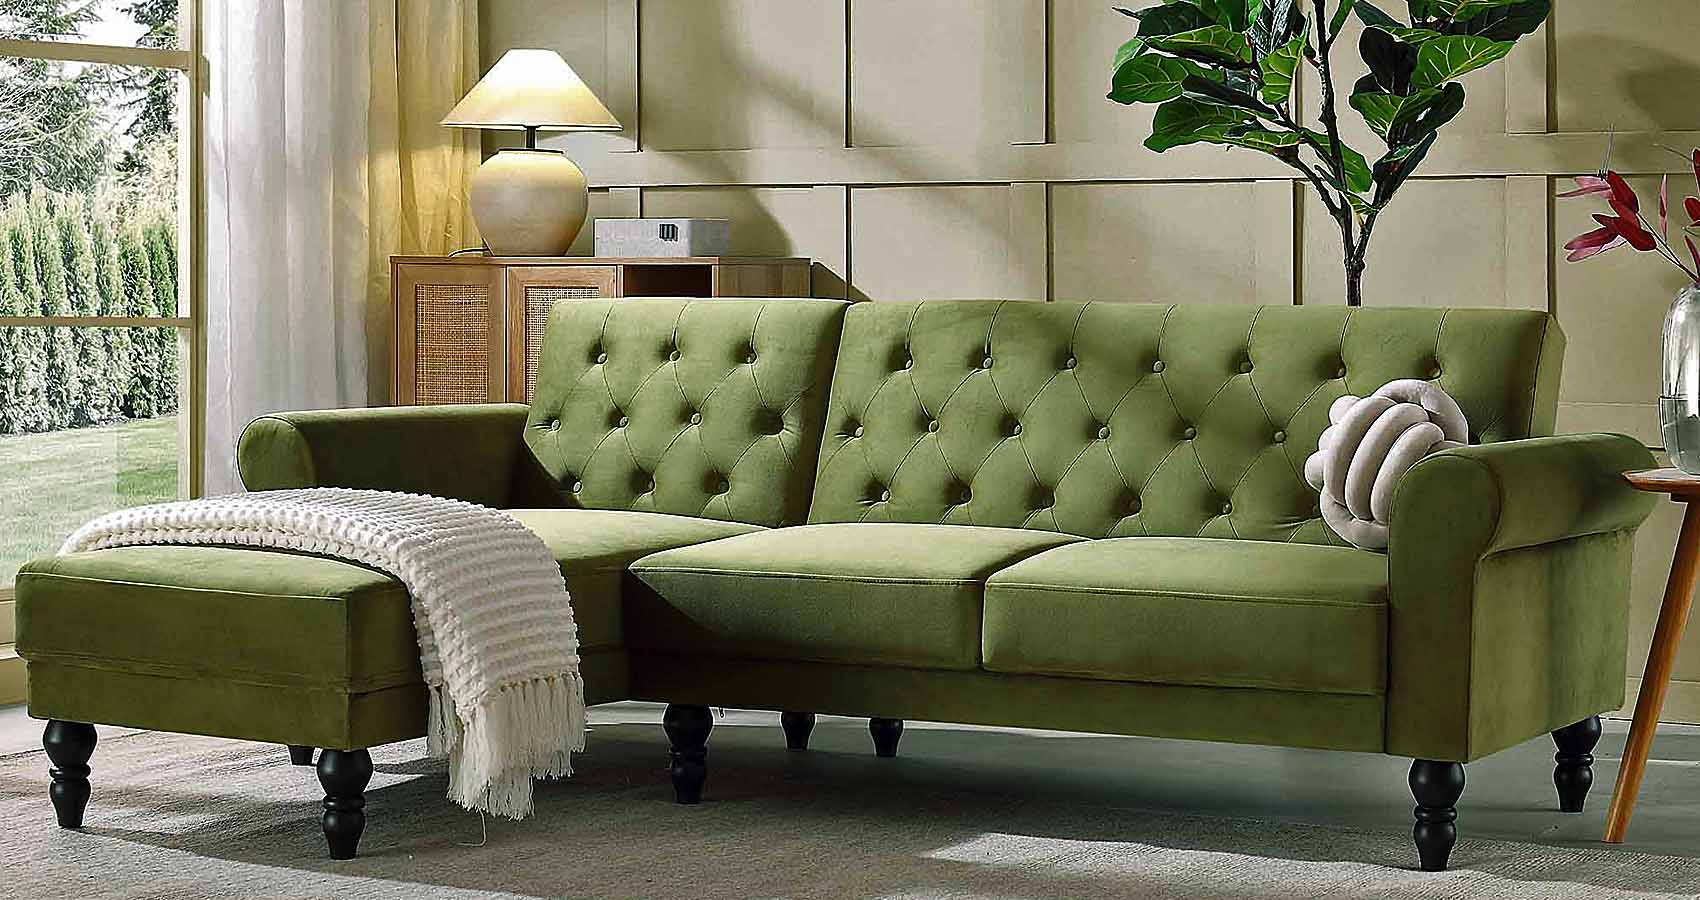 Moss Green Couch | Moss Green Sofa: Bringing Nature's Tranquility Indoors